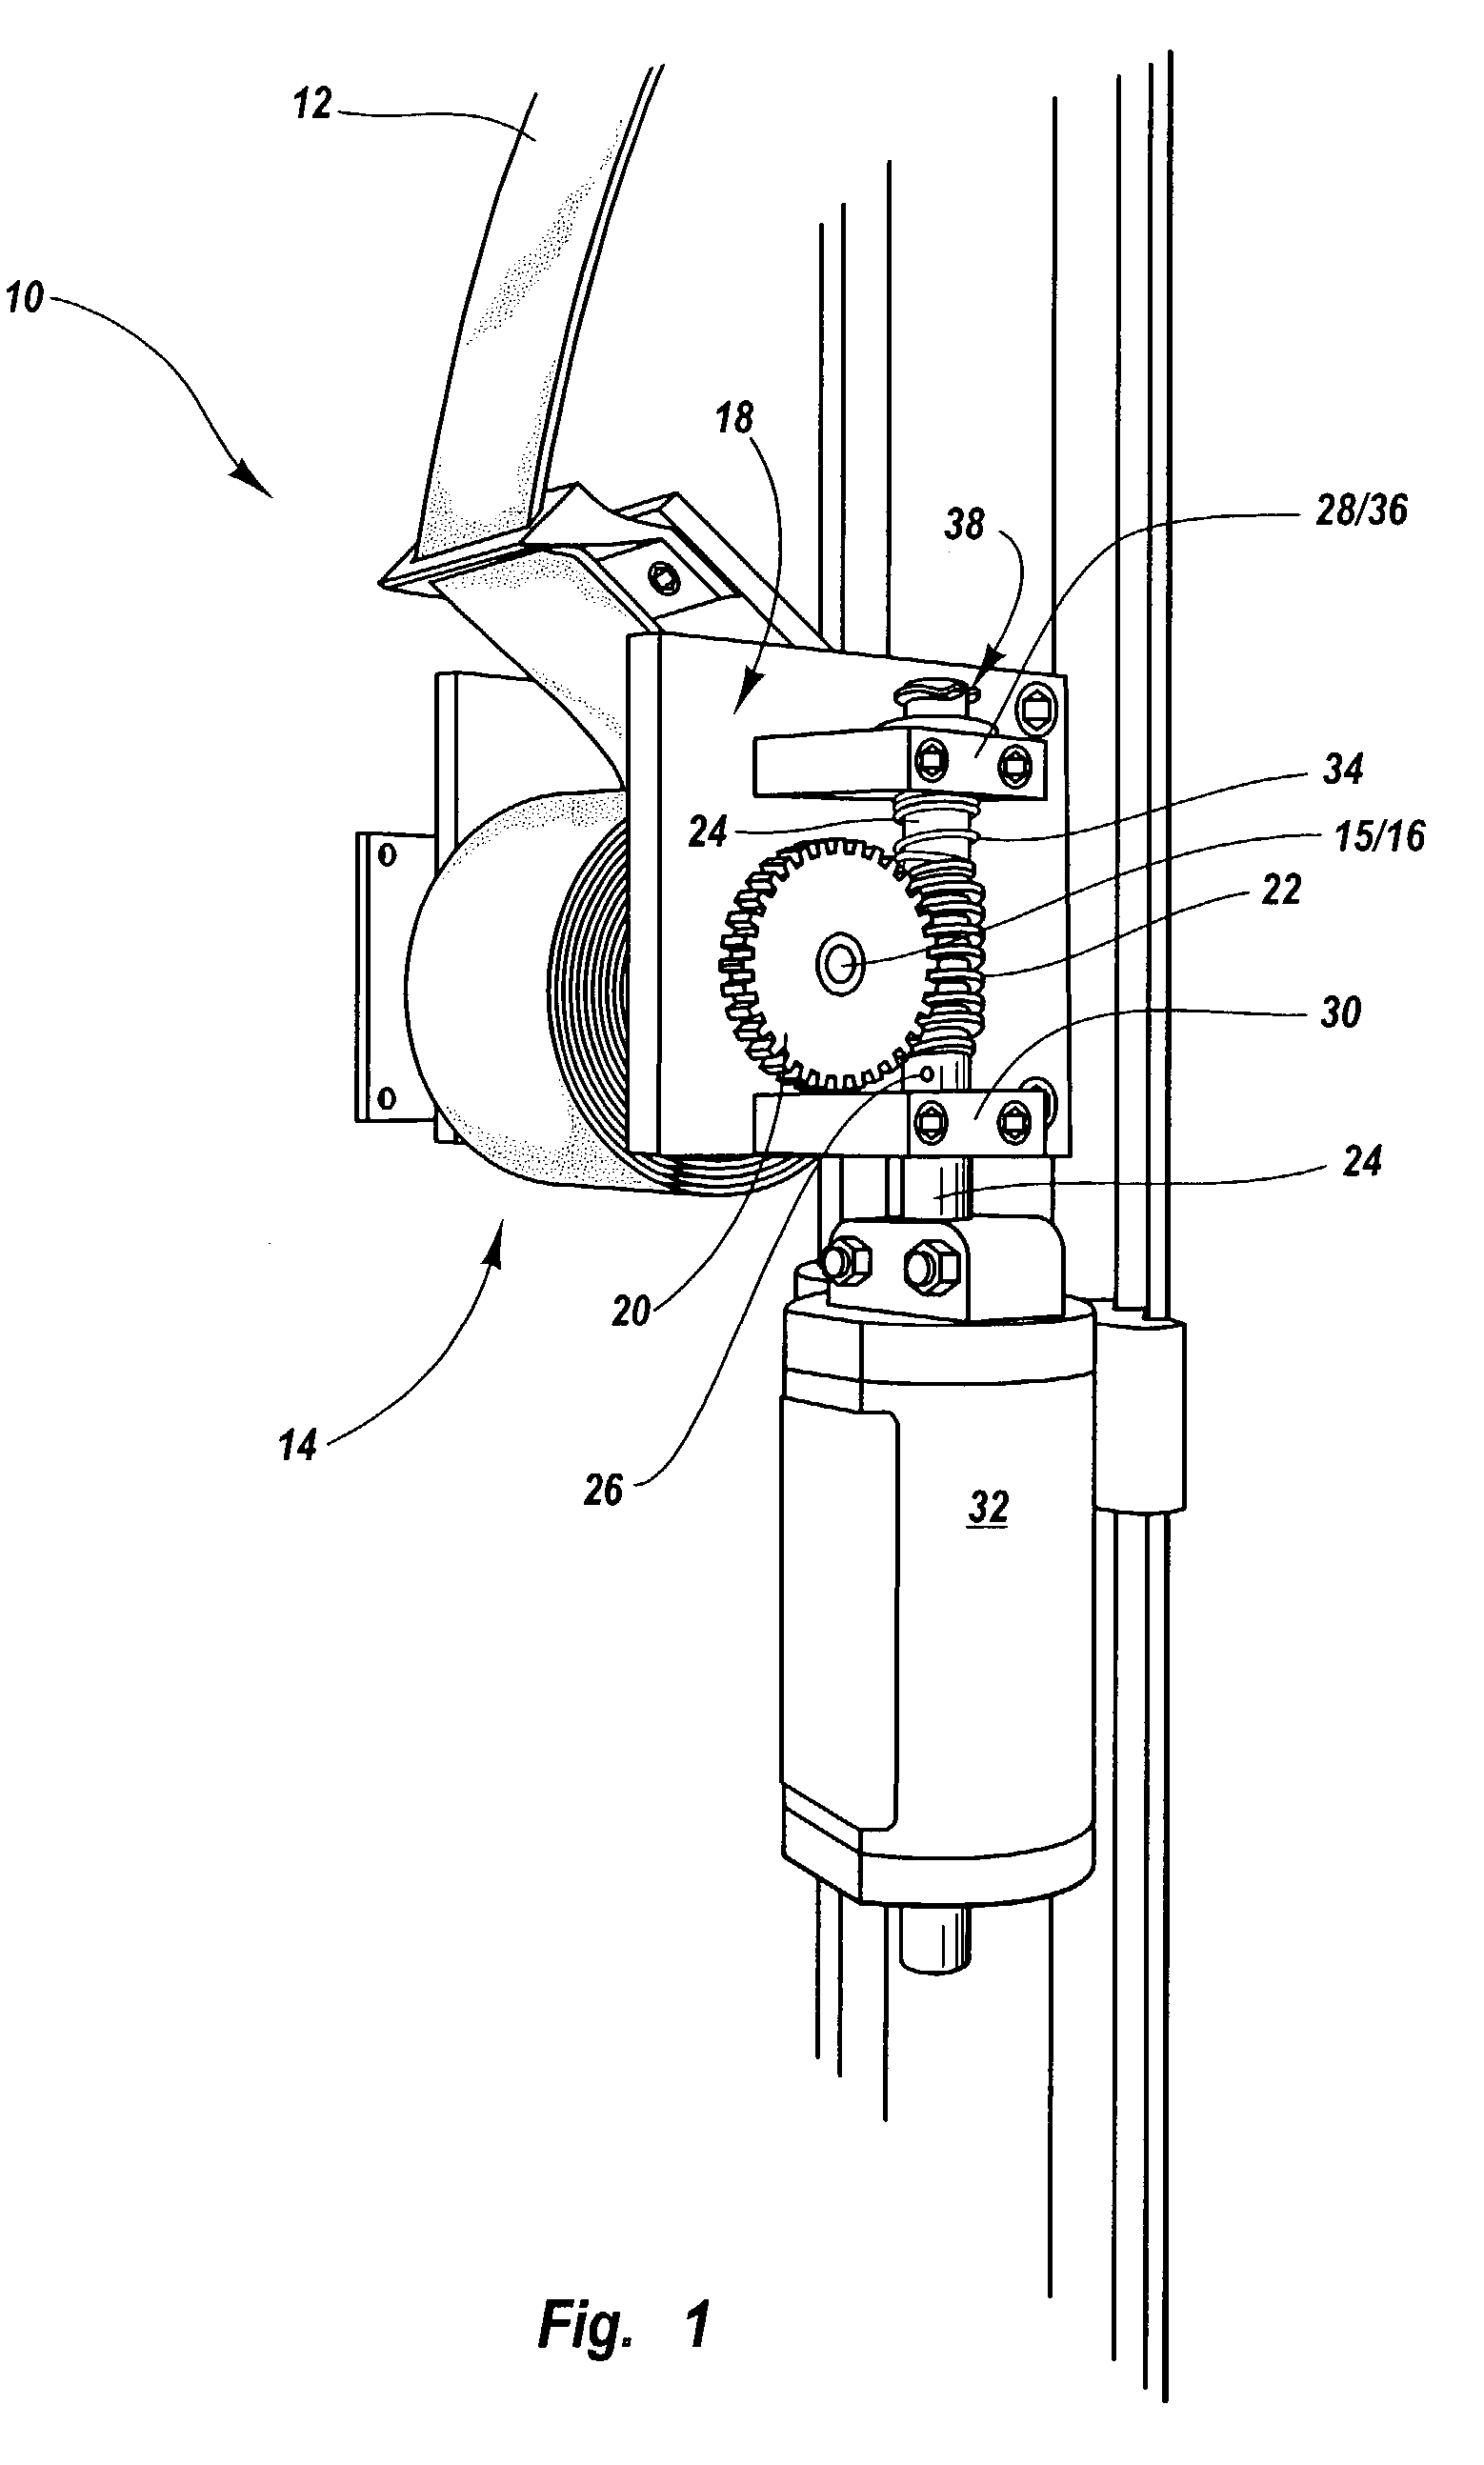 Electric seat belt retractor system